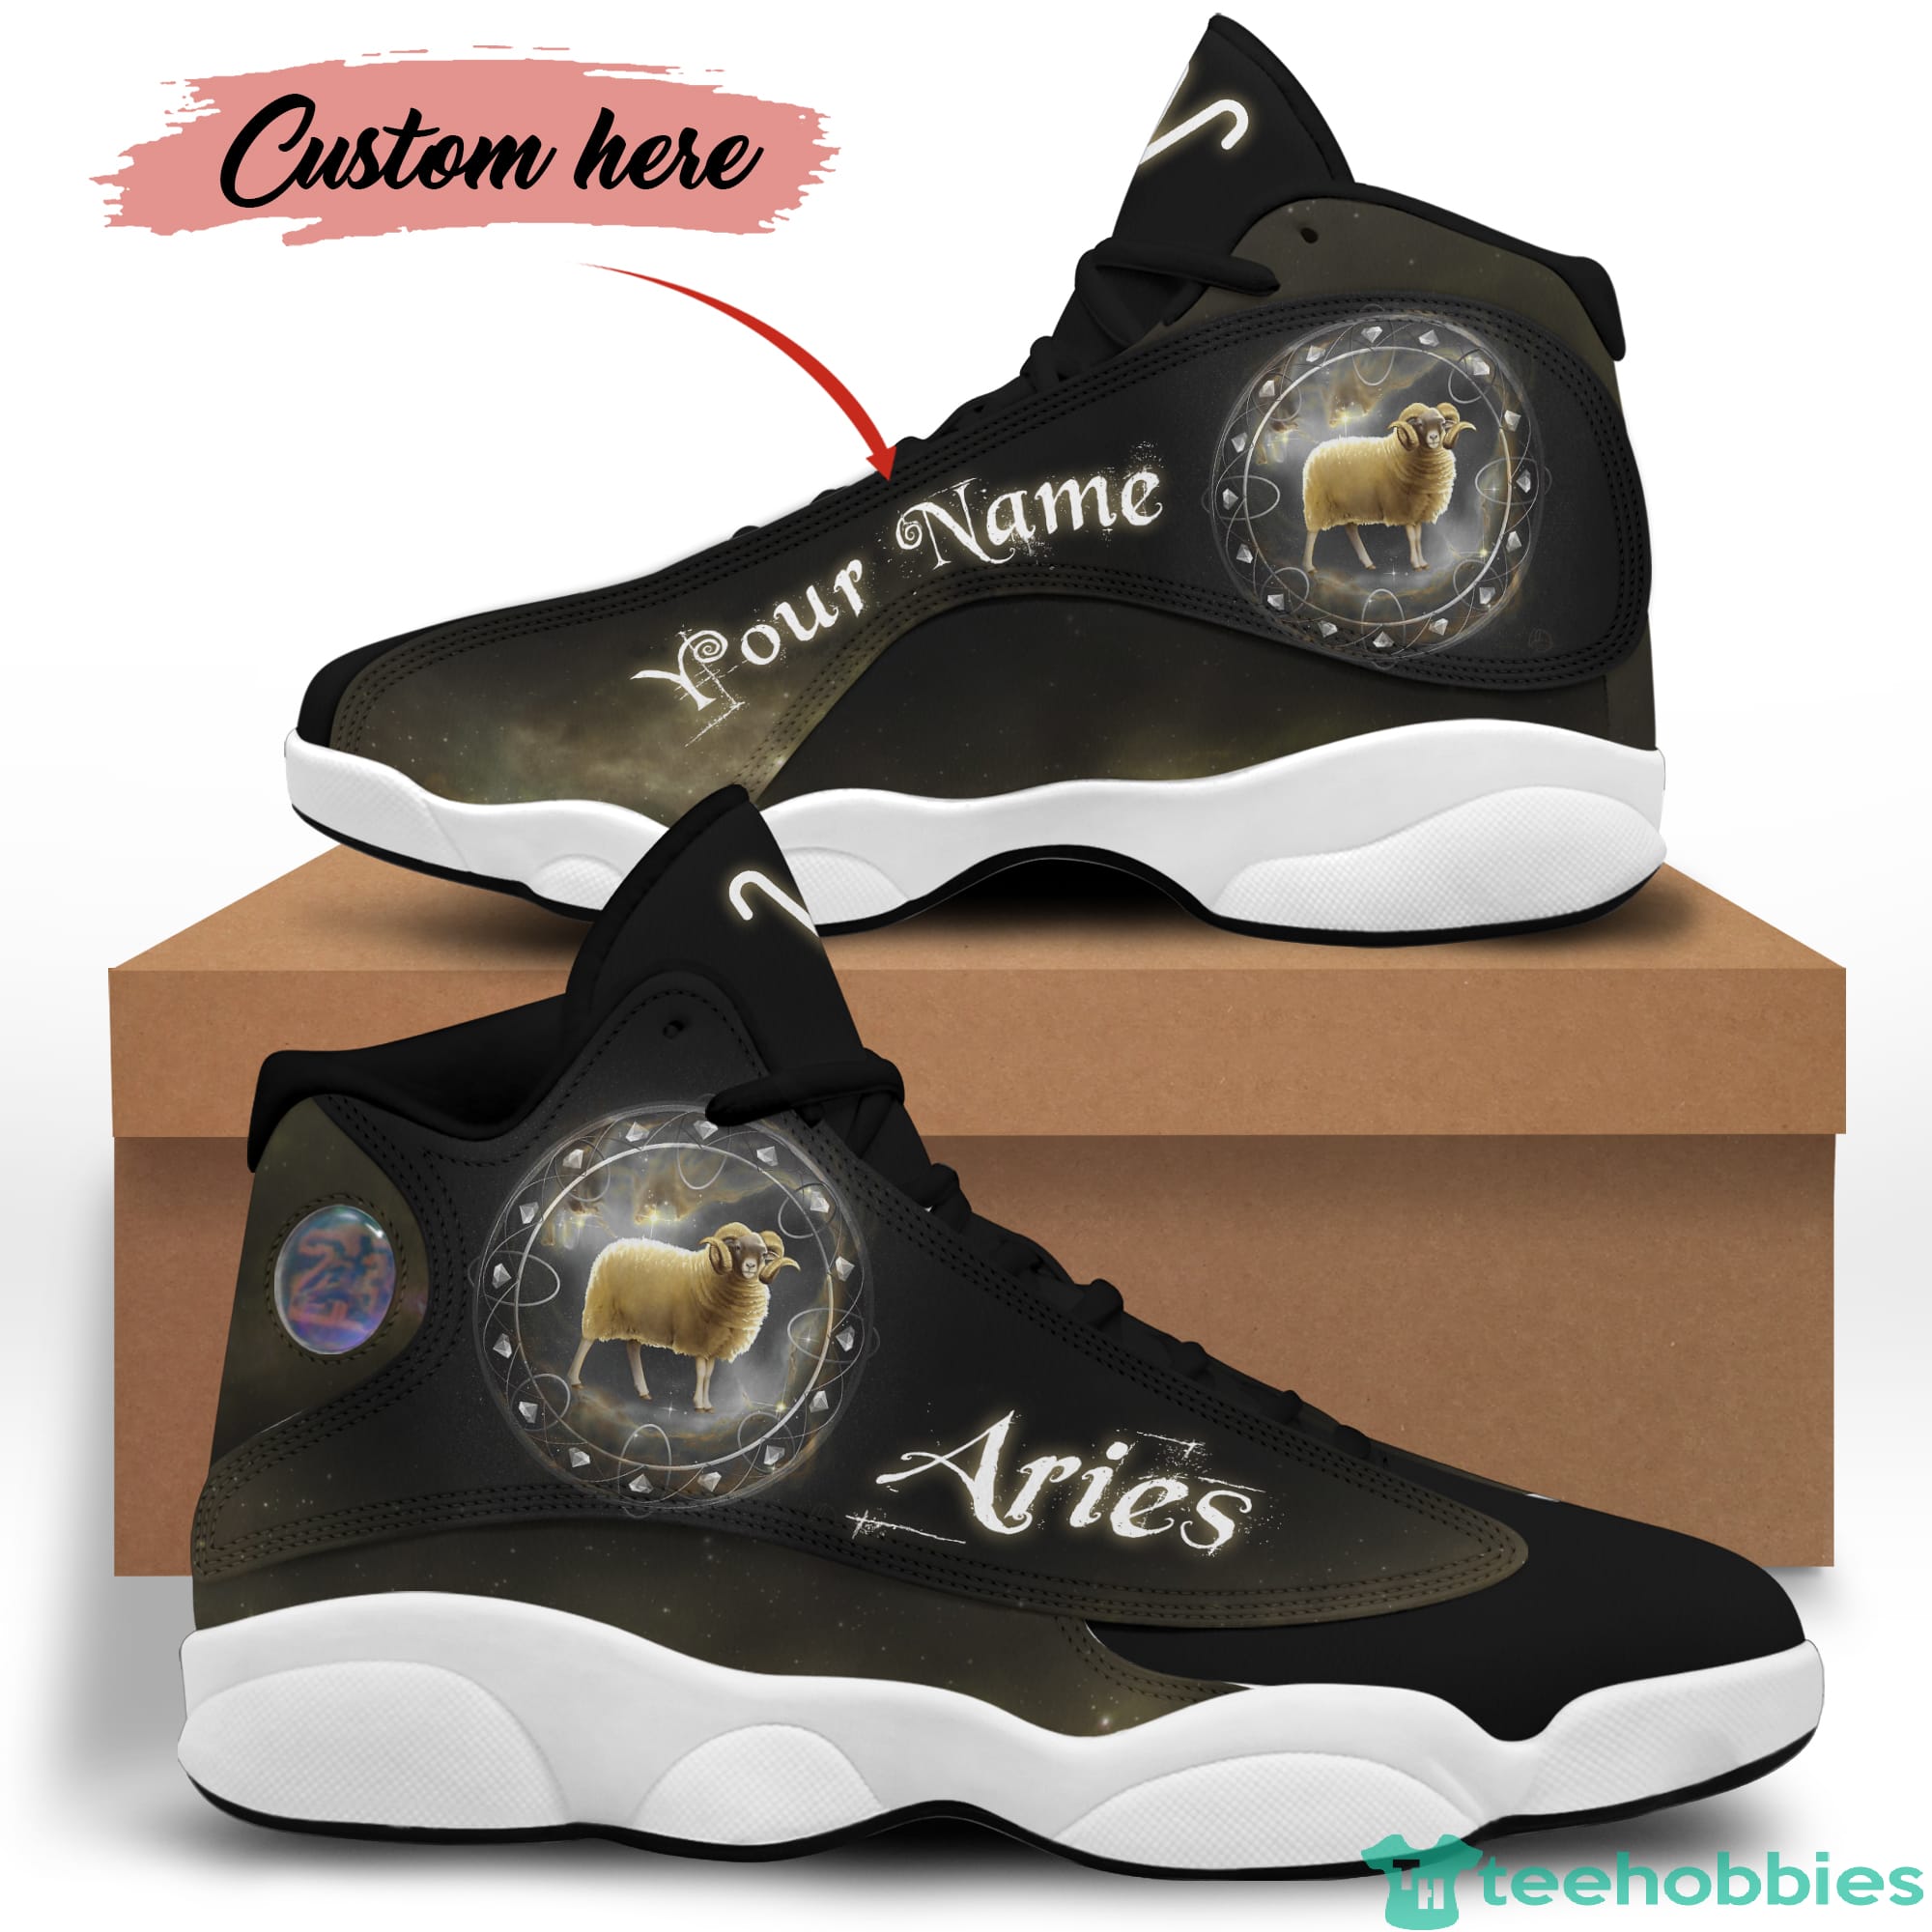 Aries Birthday Gift Personalized Name Personalized Name Air Jordan 13 Shoes SKU-300